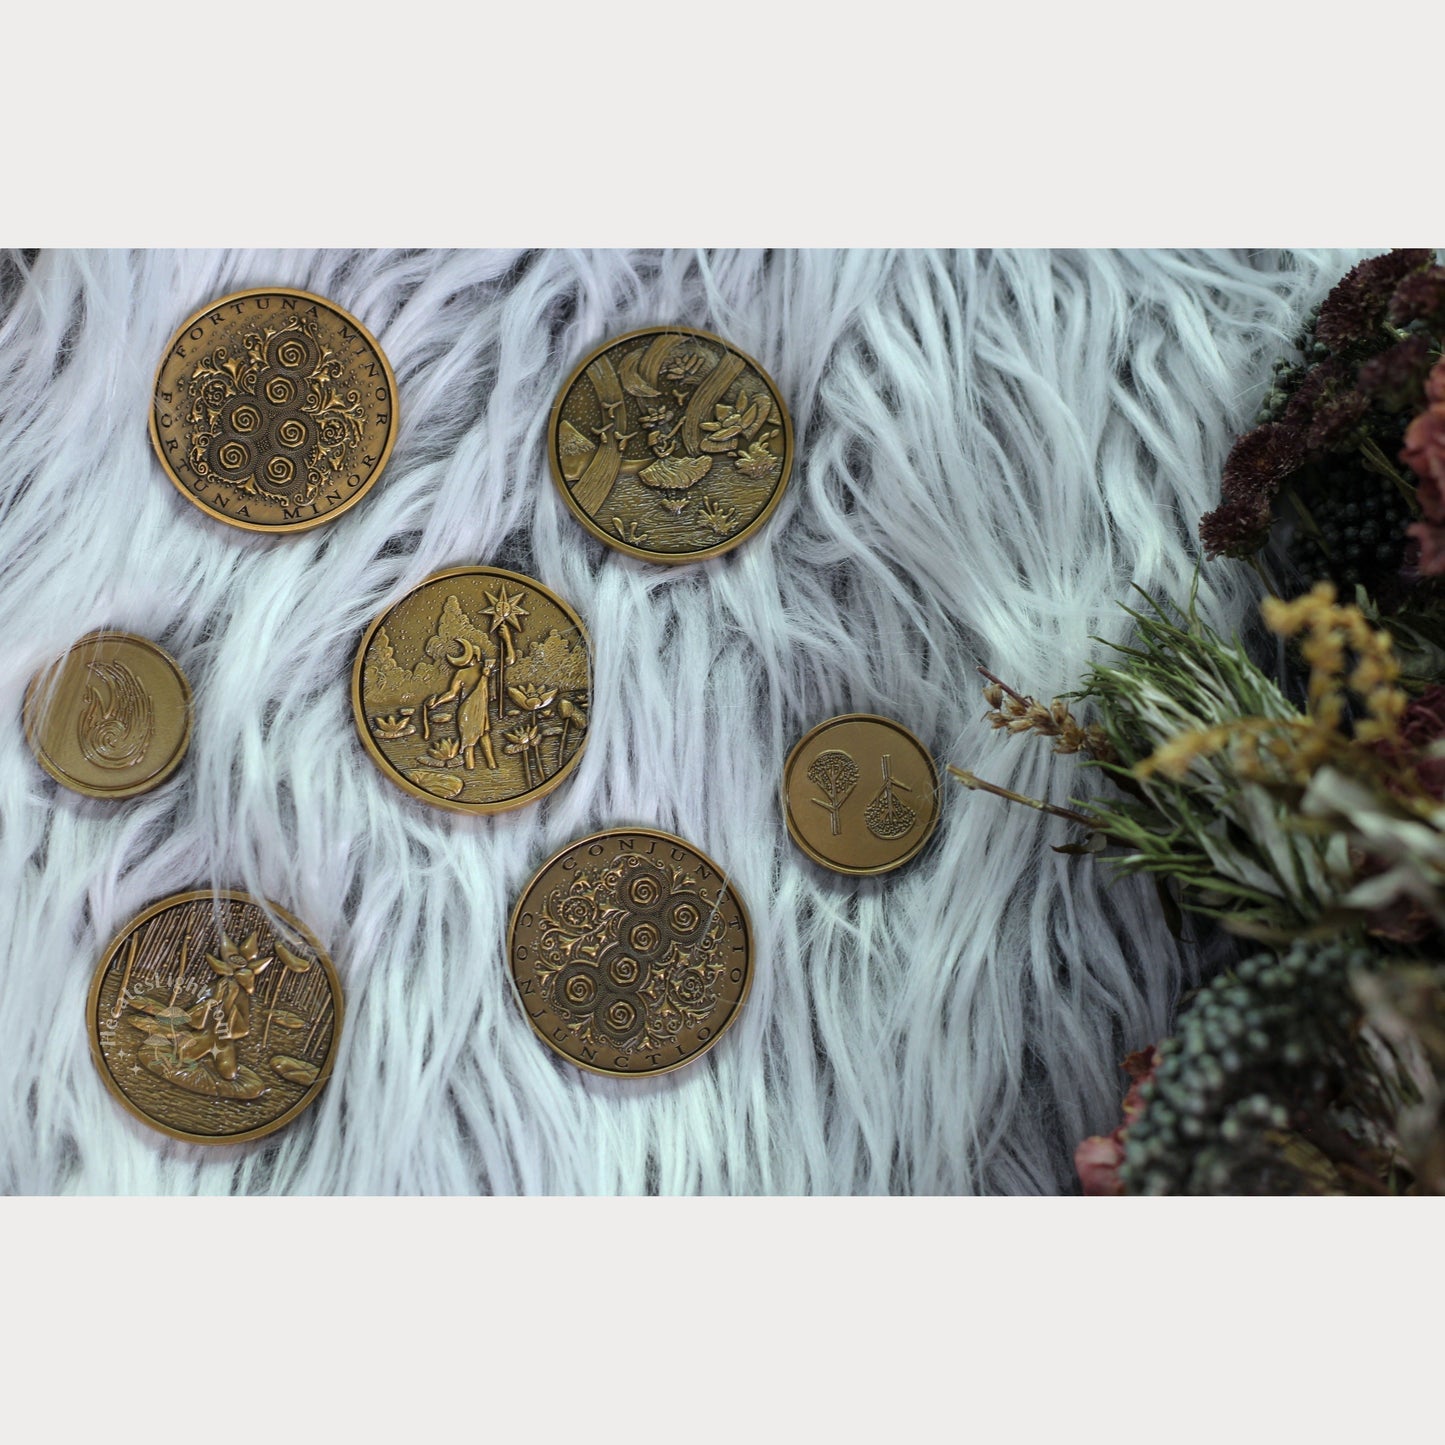 Geomantic Visions Set of 20 Coins James R. Eads calgary, canada, coin, coins, divination, divination tool, geomancy, gold, set Geomantic Visions Set of 20 Coins James R. Eads calgary, canada, coin, coins, divination, divination tool, geomancy, gold, set metaphysical occult supplies witchy hecateslight.com witchcraft cottagecore witch gifts metaphysical occult supplies witchy hecateslight.com witchcraft cottagecore witch gifts